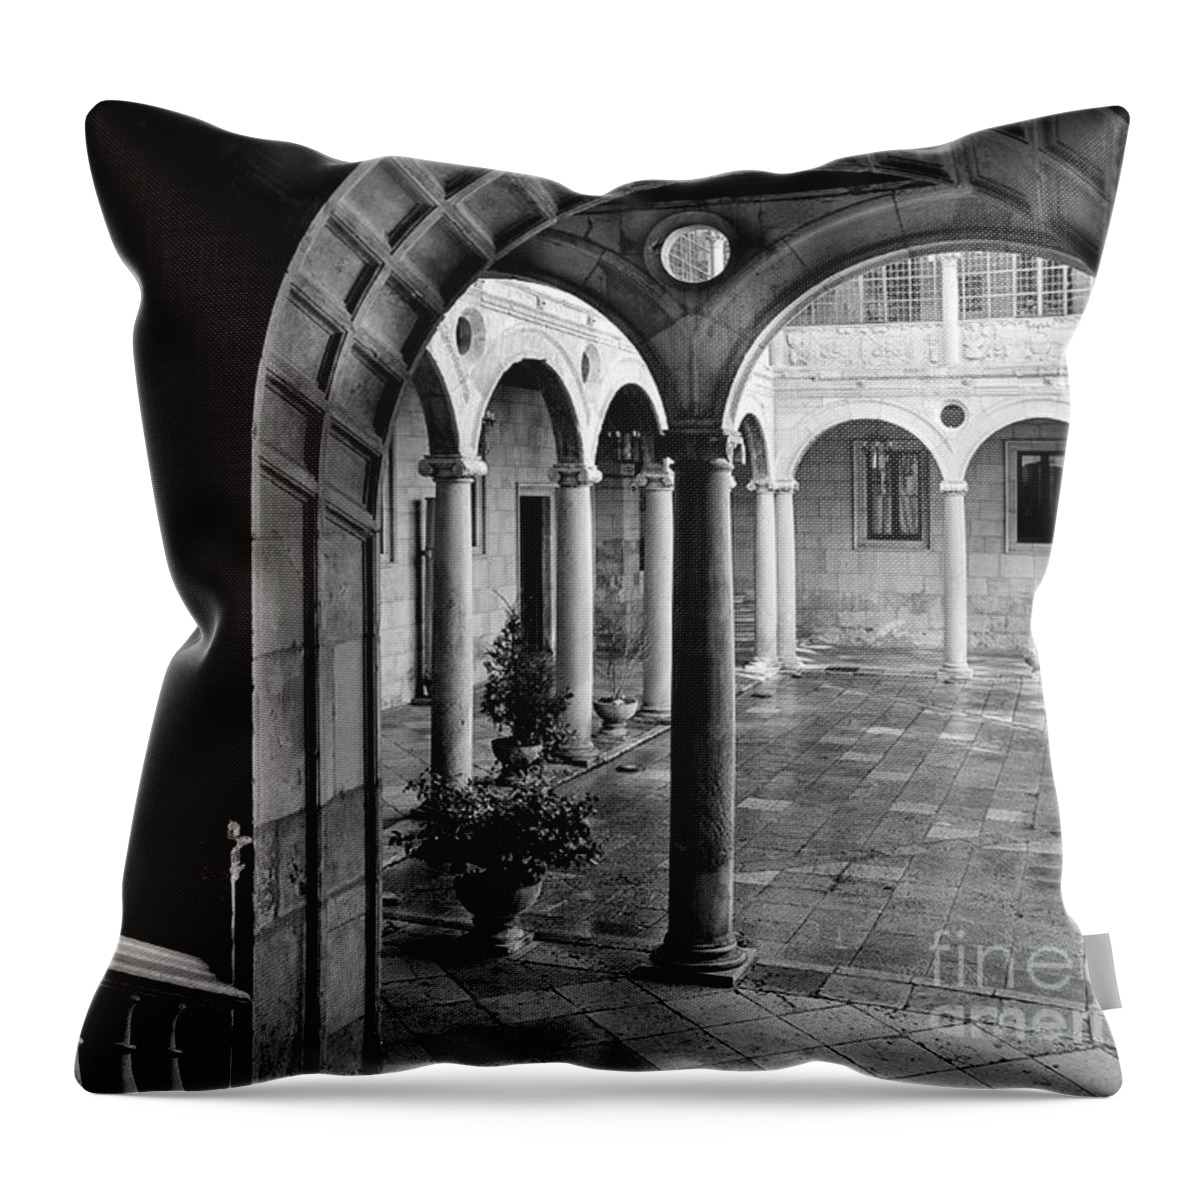 Castilla Leon Throw Pillow featuring the photograph The Palace of the Guzmanes Courtyard by RicardMN Photography